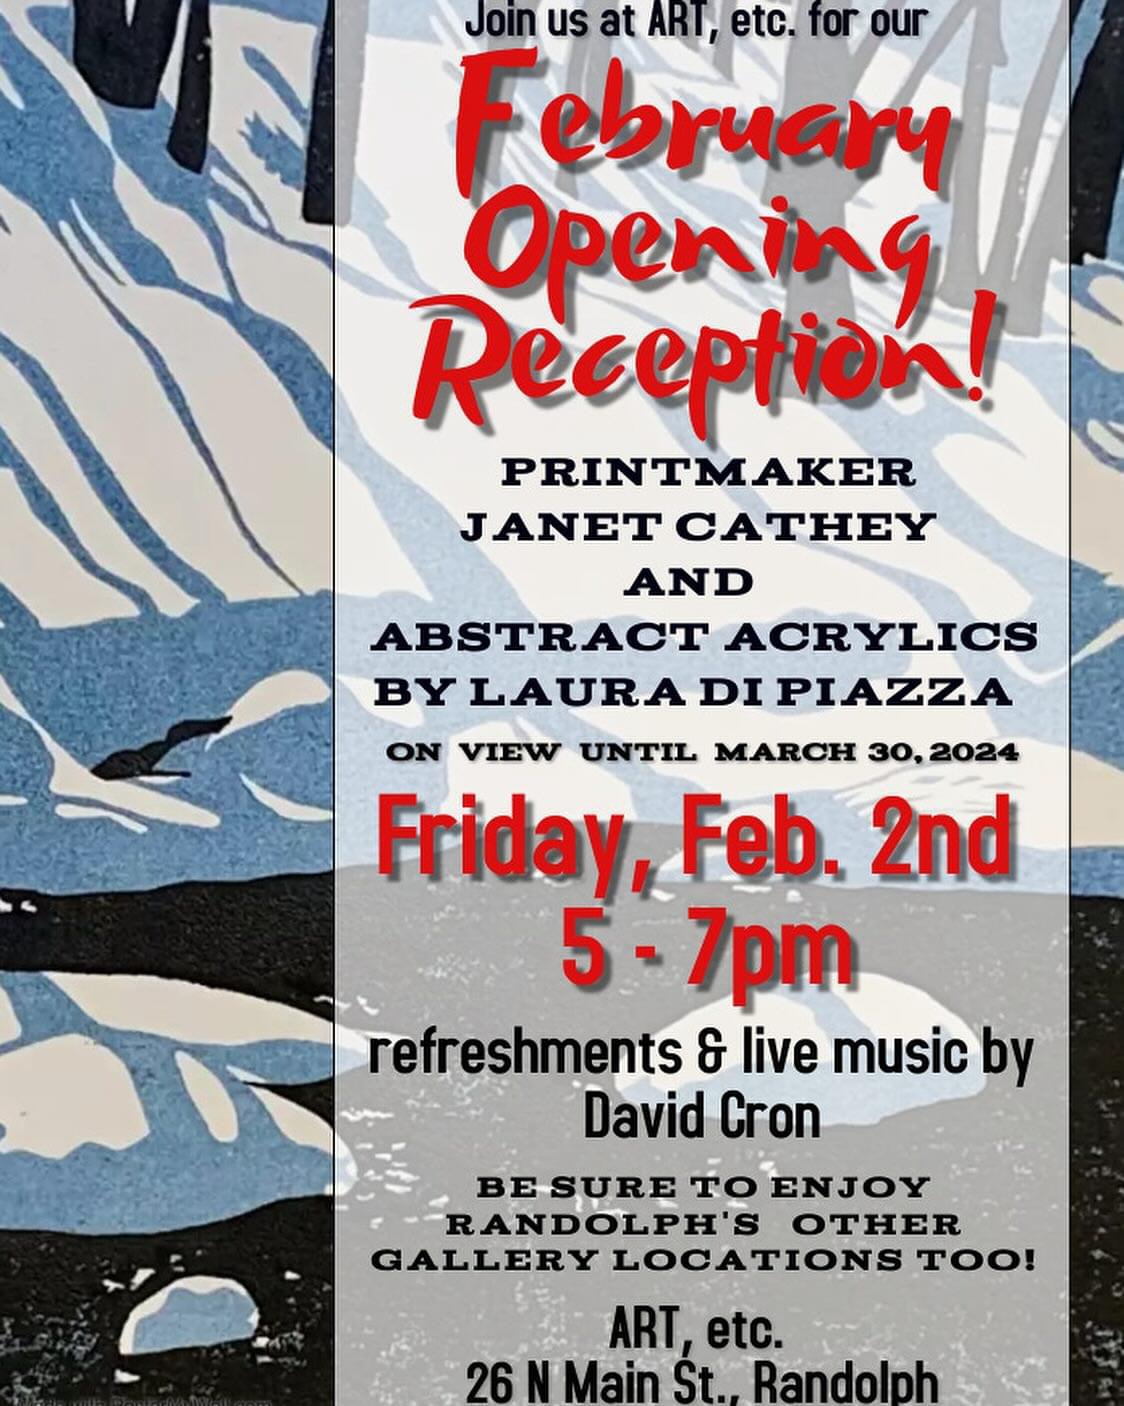 POster for February opening Reception at Art, Etc.